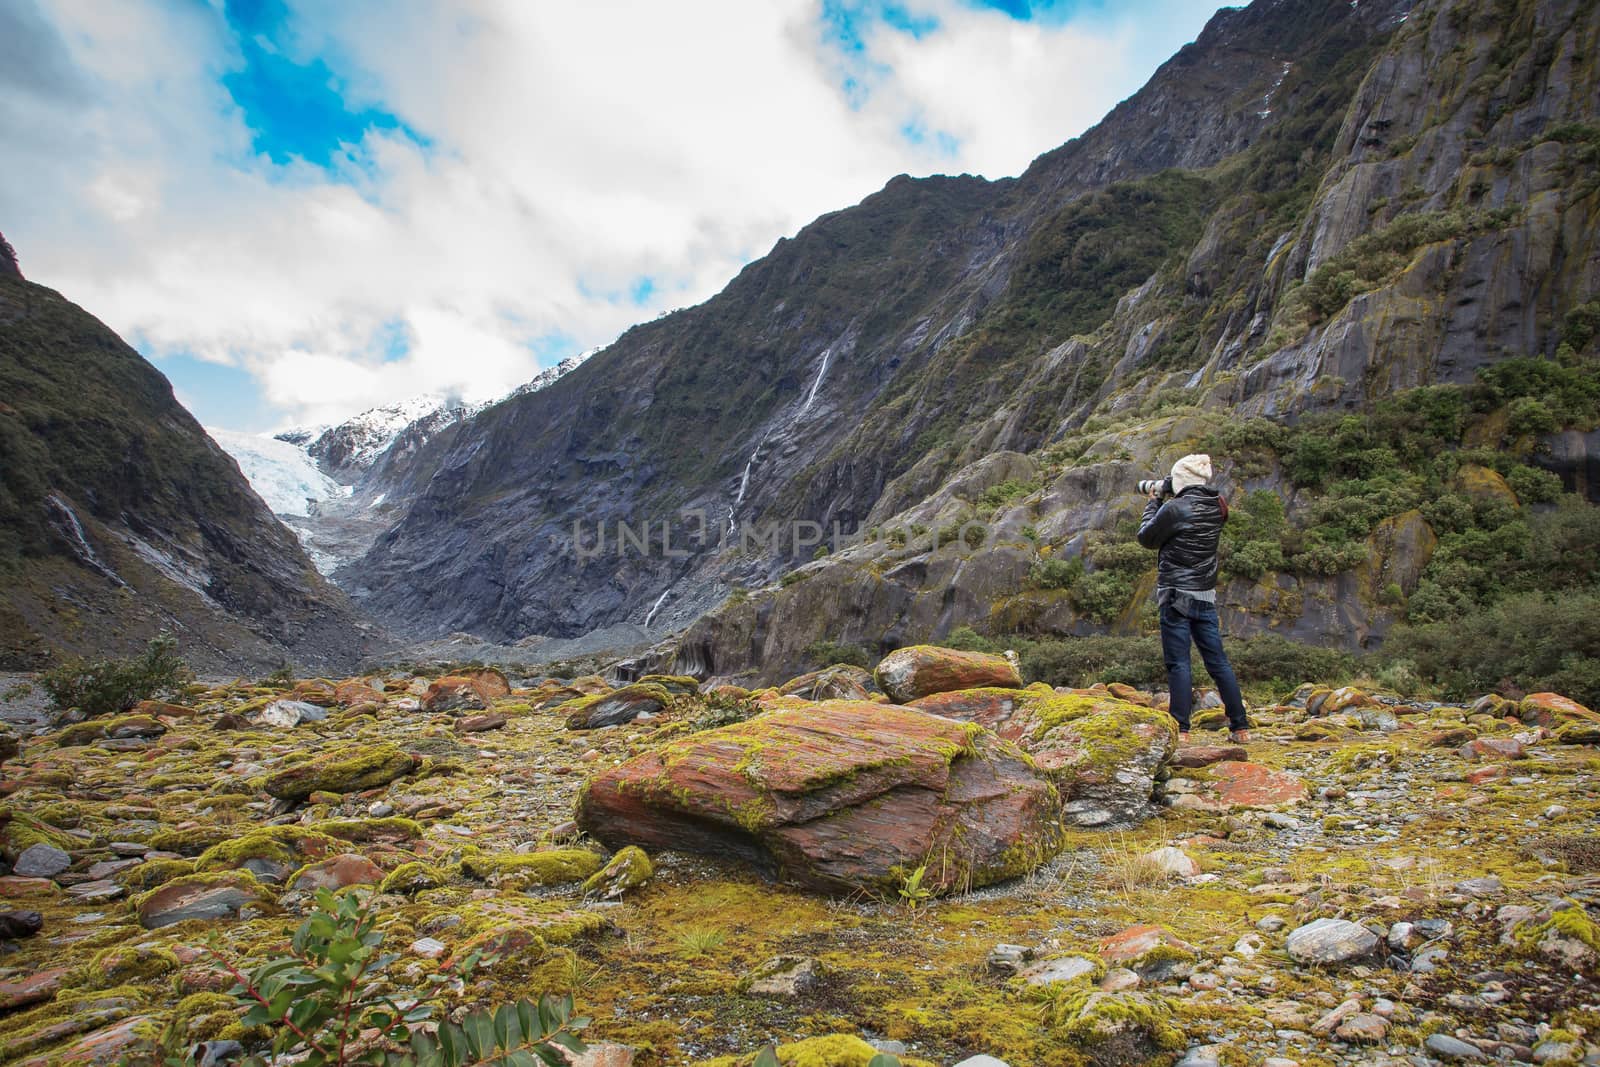 photographer taking a photo in franz josef glacier in south island new zealand importanat natural traveling destination